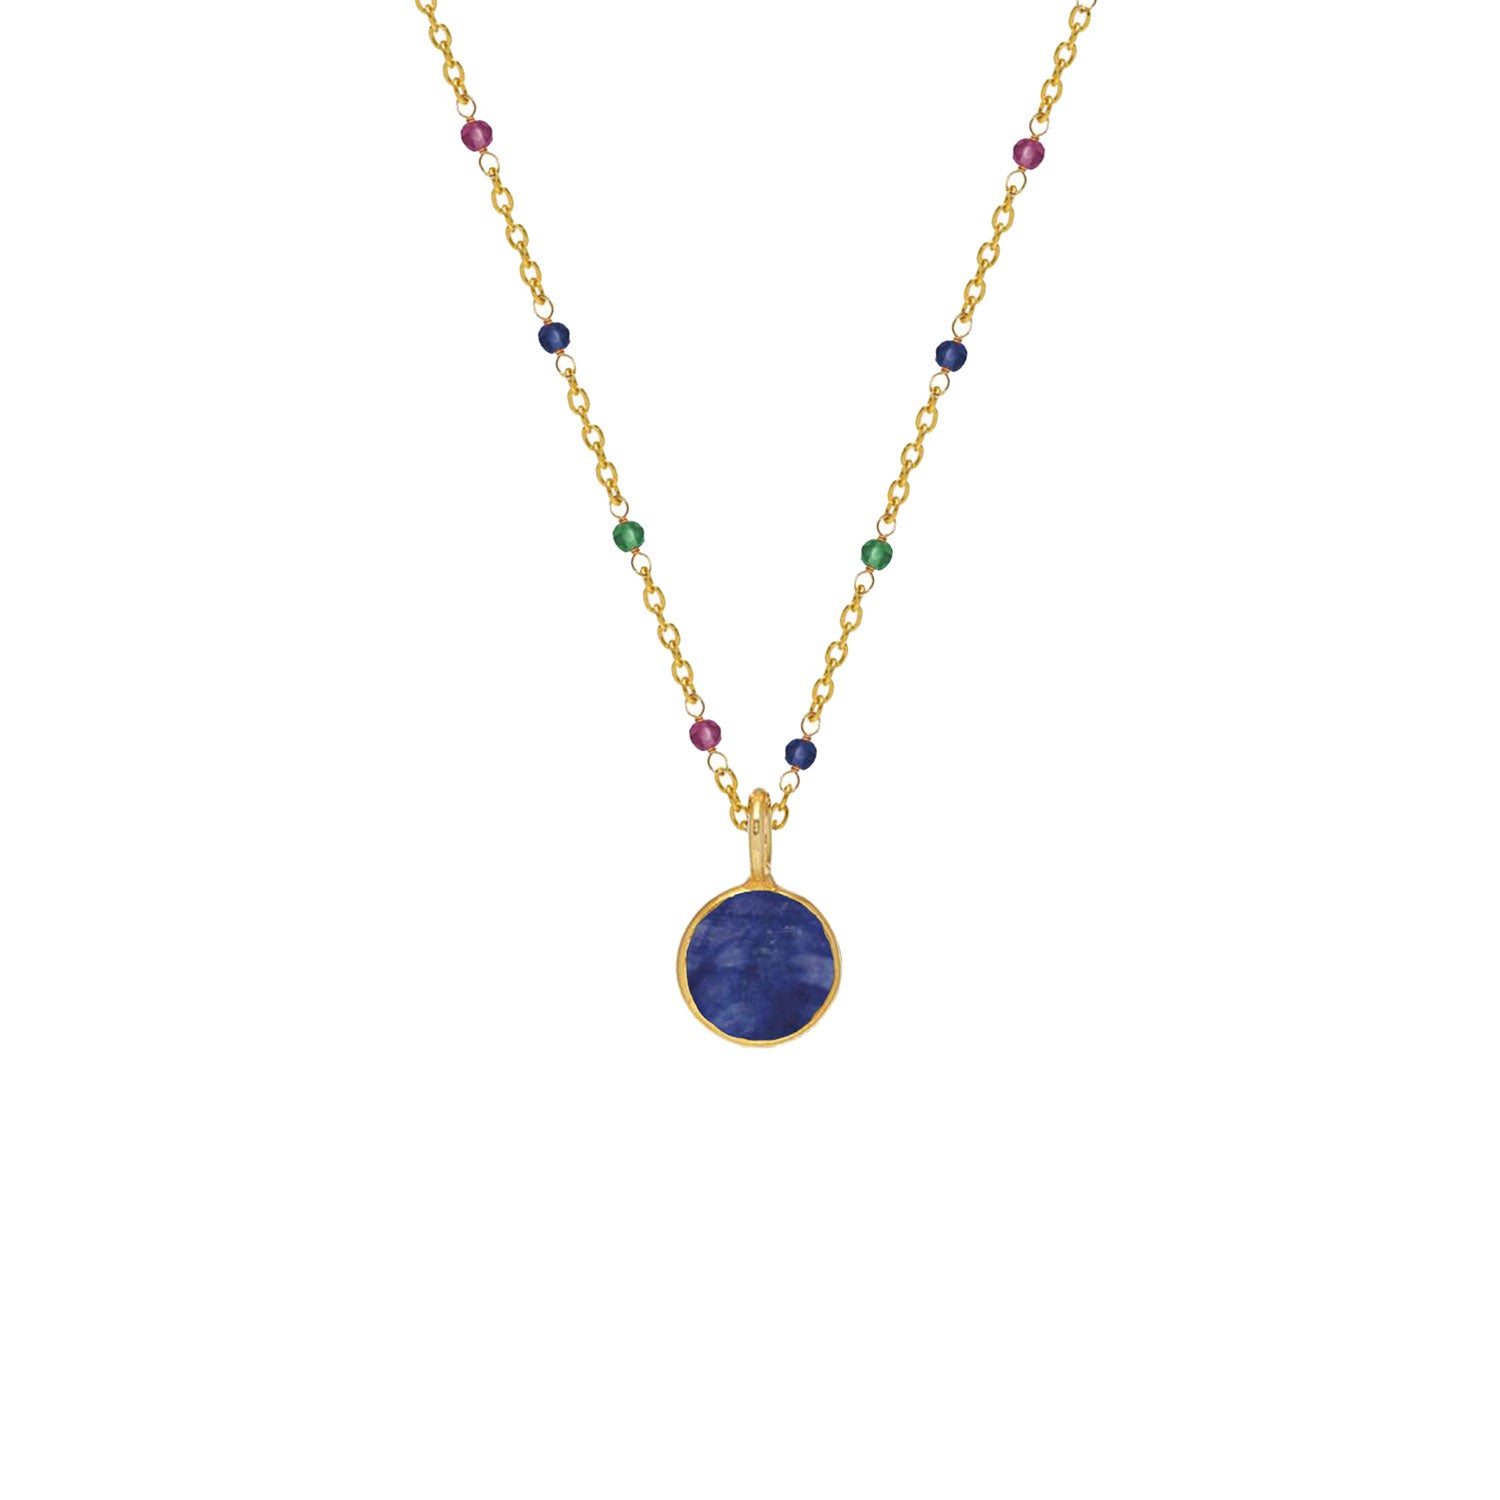 Fancy multi Rosary with Astro Sapphire Pendant